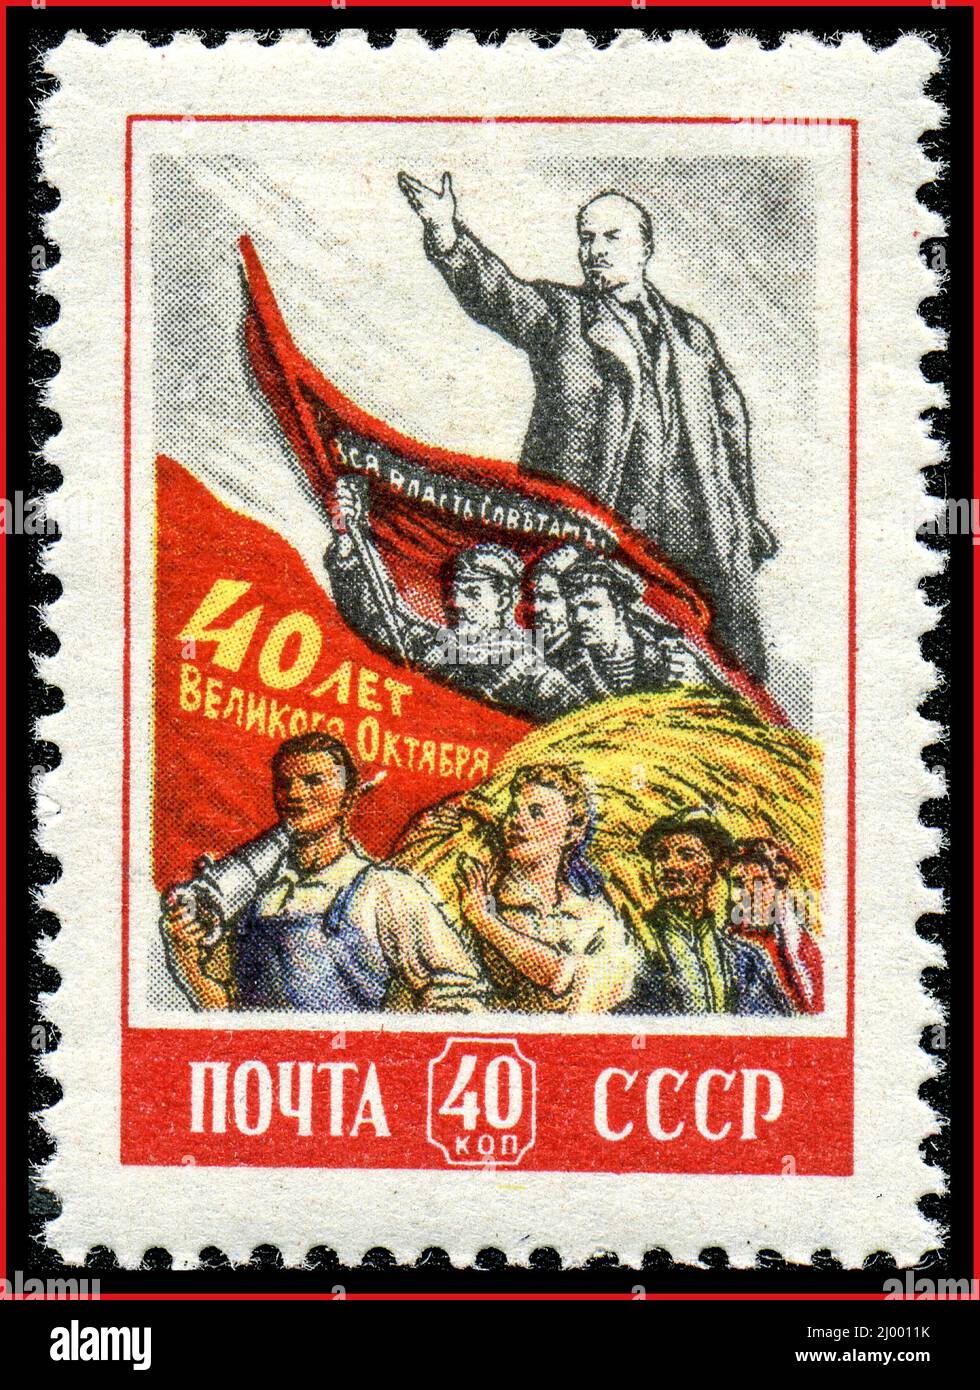 Soviet Union stamp, 40th anniversary of the October Revolution, victorious march of the October Revolution, with Lenin featured, from a placard by I. Toidze 'Two flags - two epochs' (1957); Date 1957 (original stamp); Stock Photo